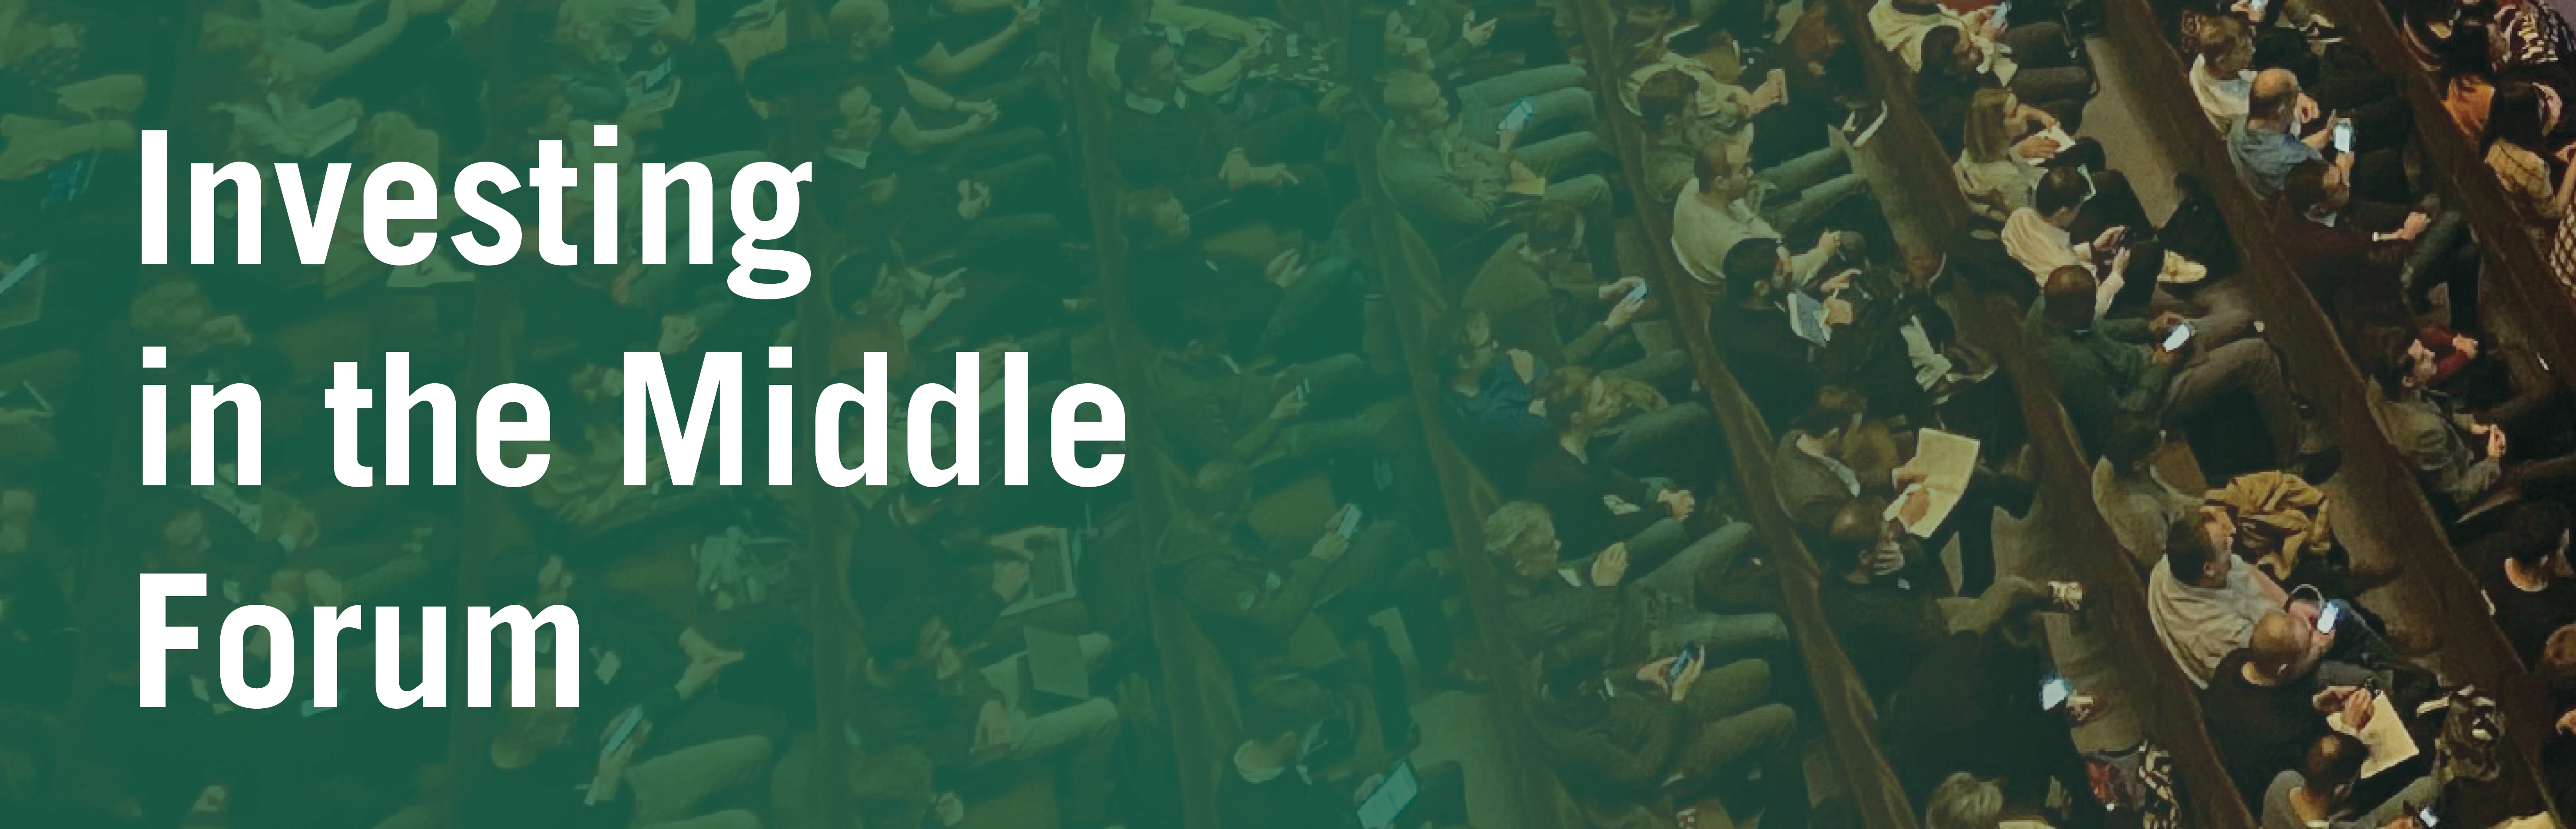 Investing in the Middle Forum